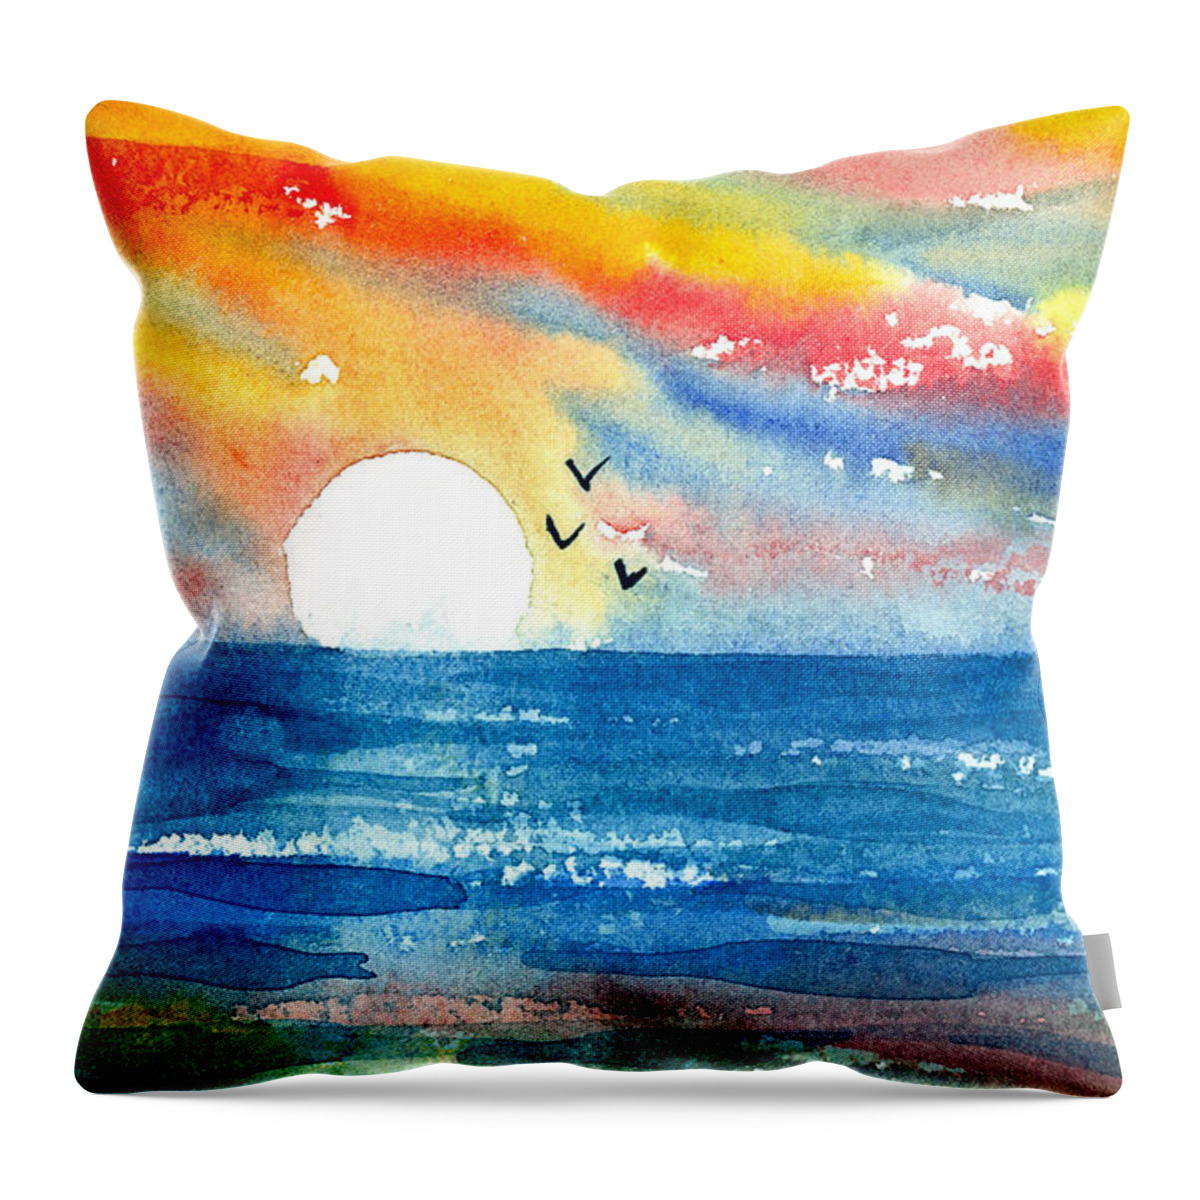 Sunset Throw Pillow featuring the mixed media Sunset Sea by Tonya Doughty